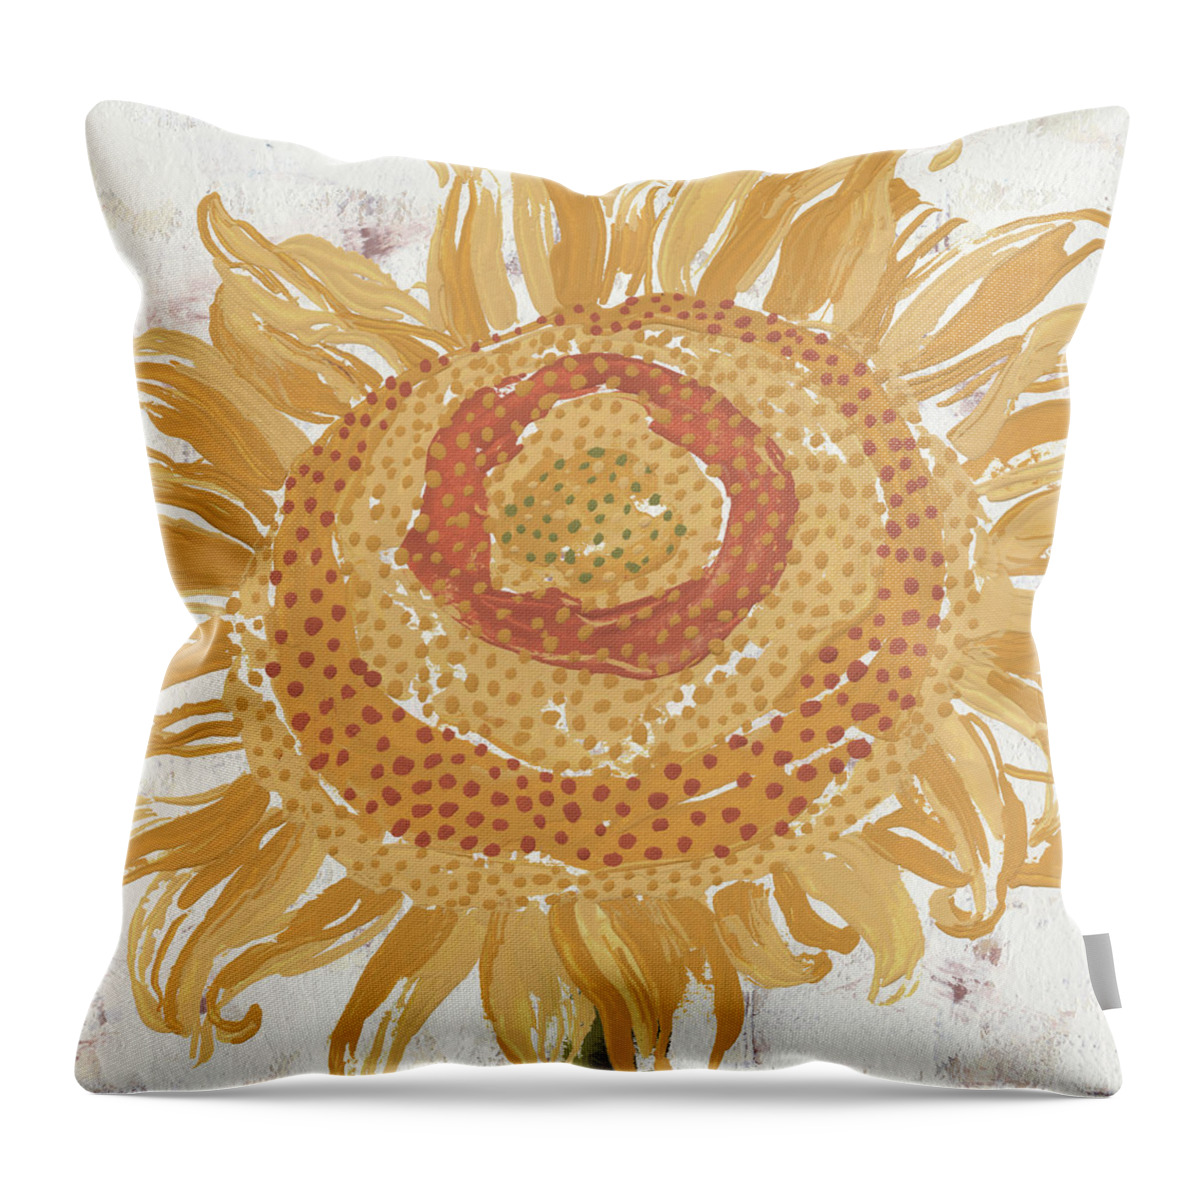 Sunflower Throw Pillow featuring the painting Sunflower II by Nikita Coulombe